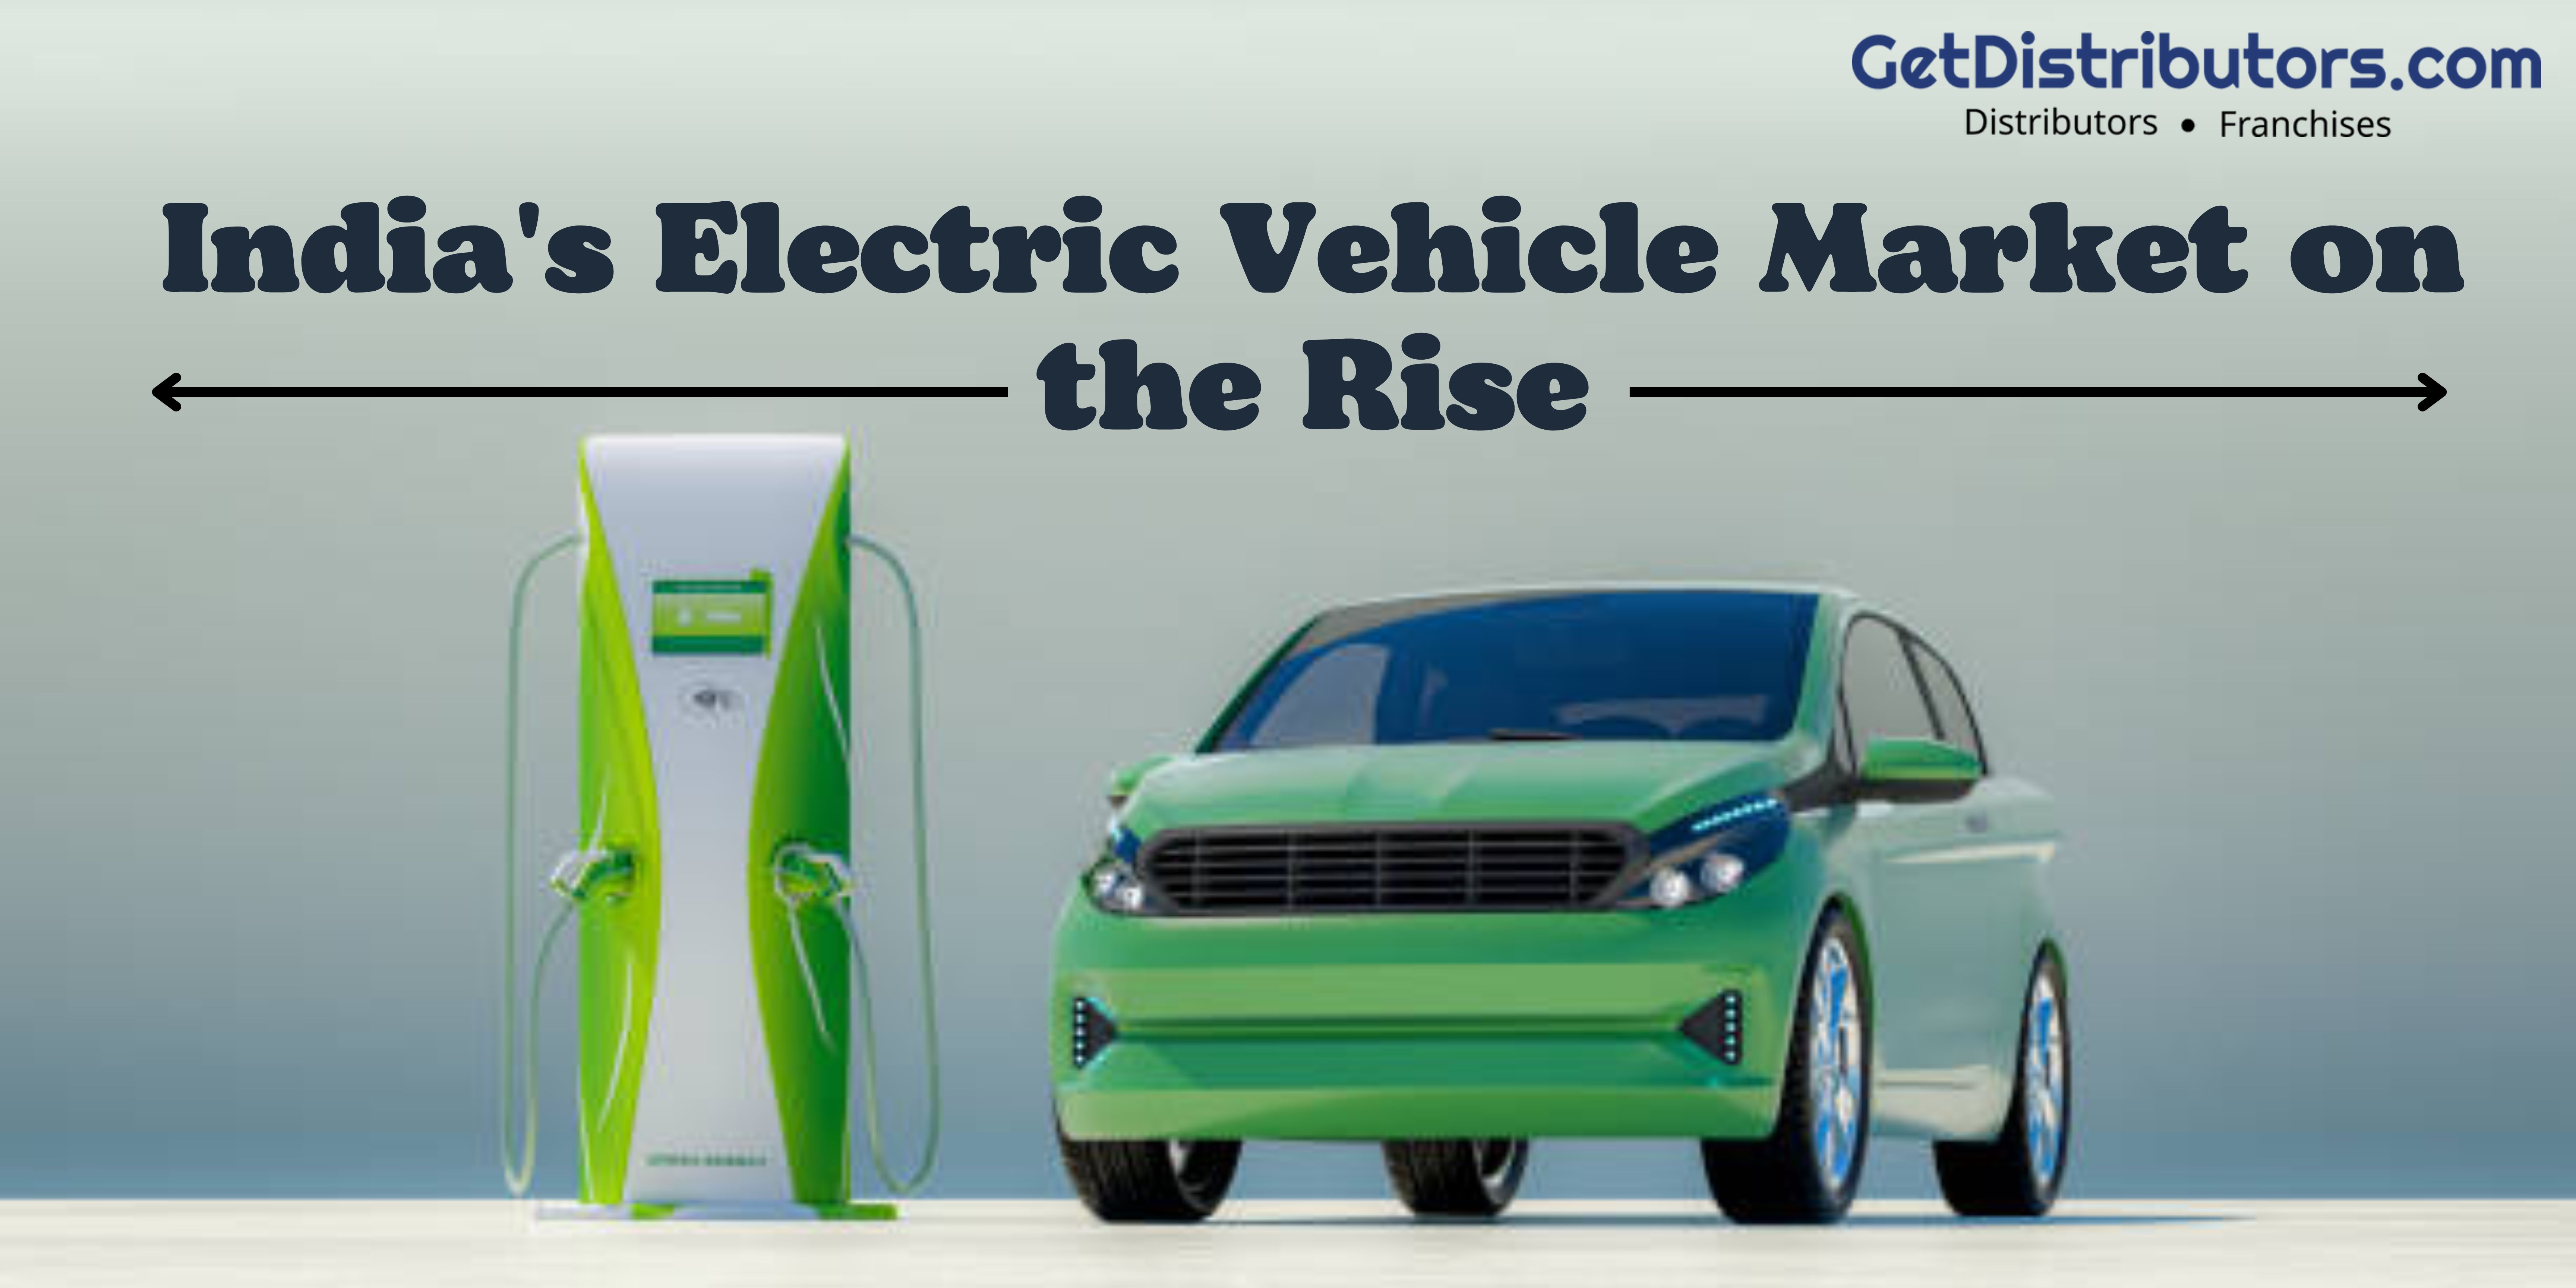 India’s Electric Vehicle Market on the Rise